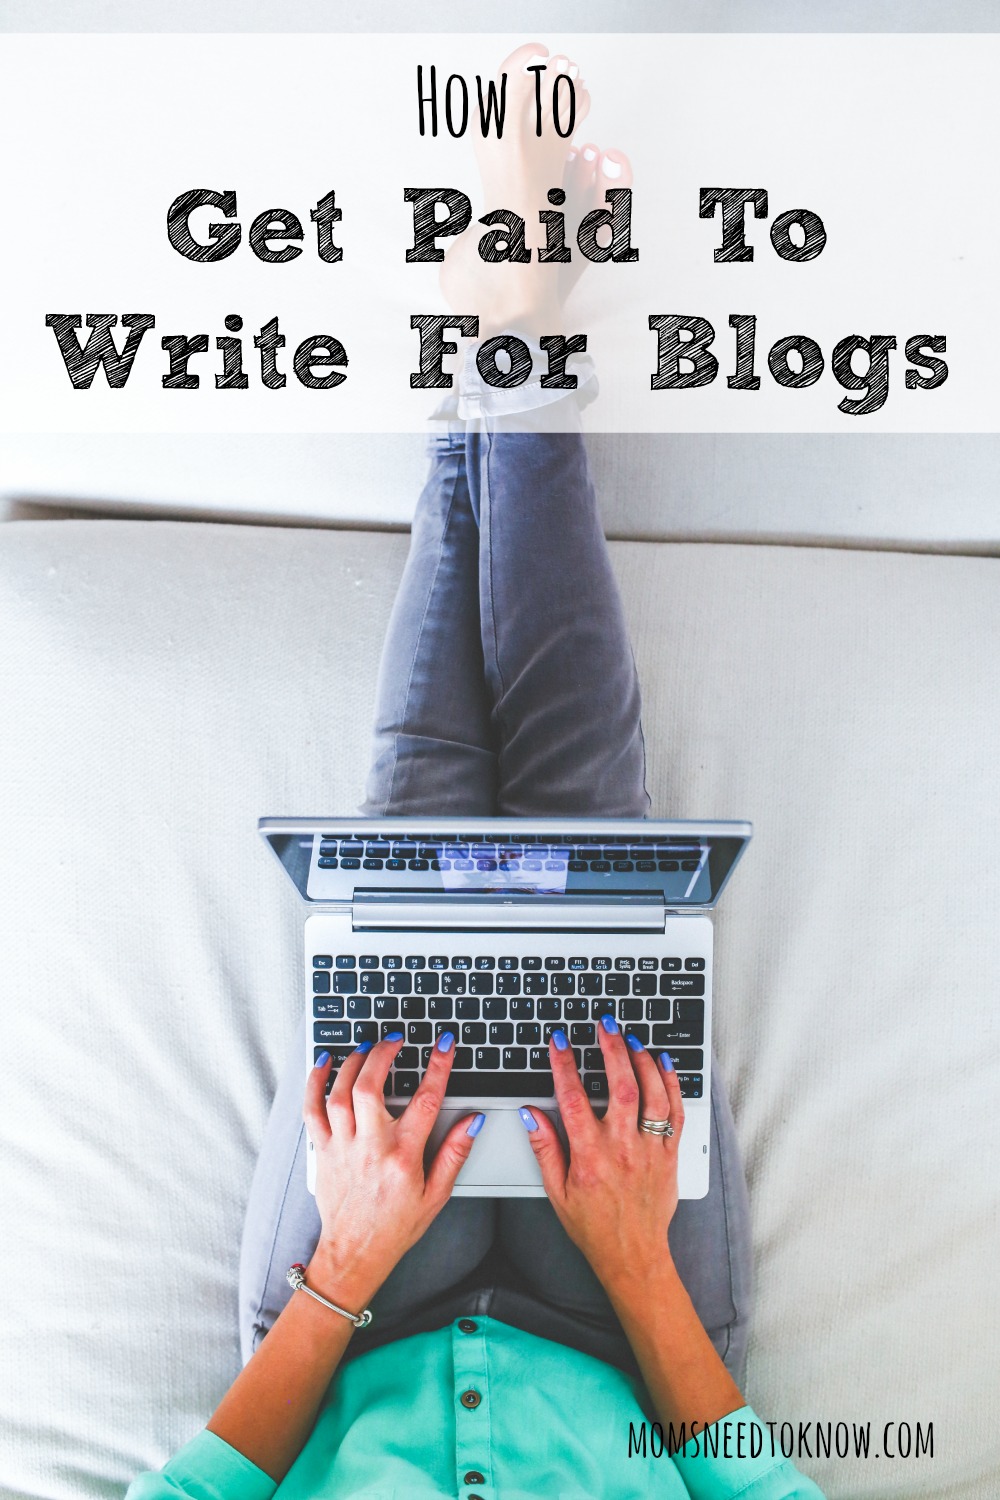 If you are looking for a way to make money, you might want to try to write for blogs. But before you take that step, there are a few things you need to know